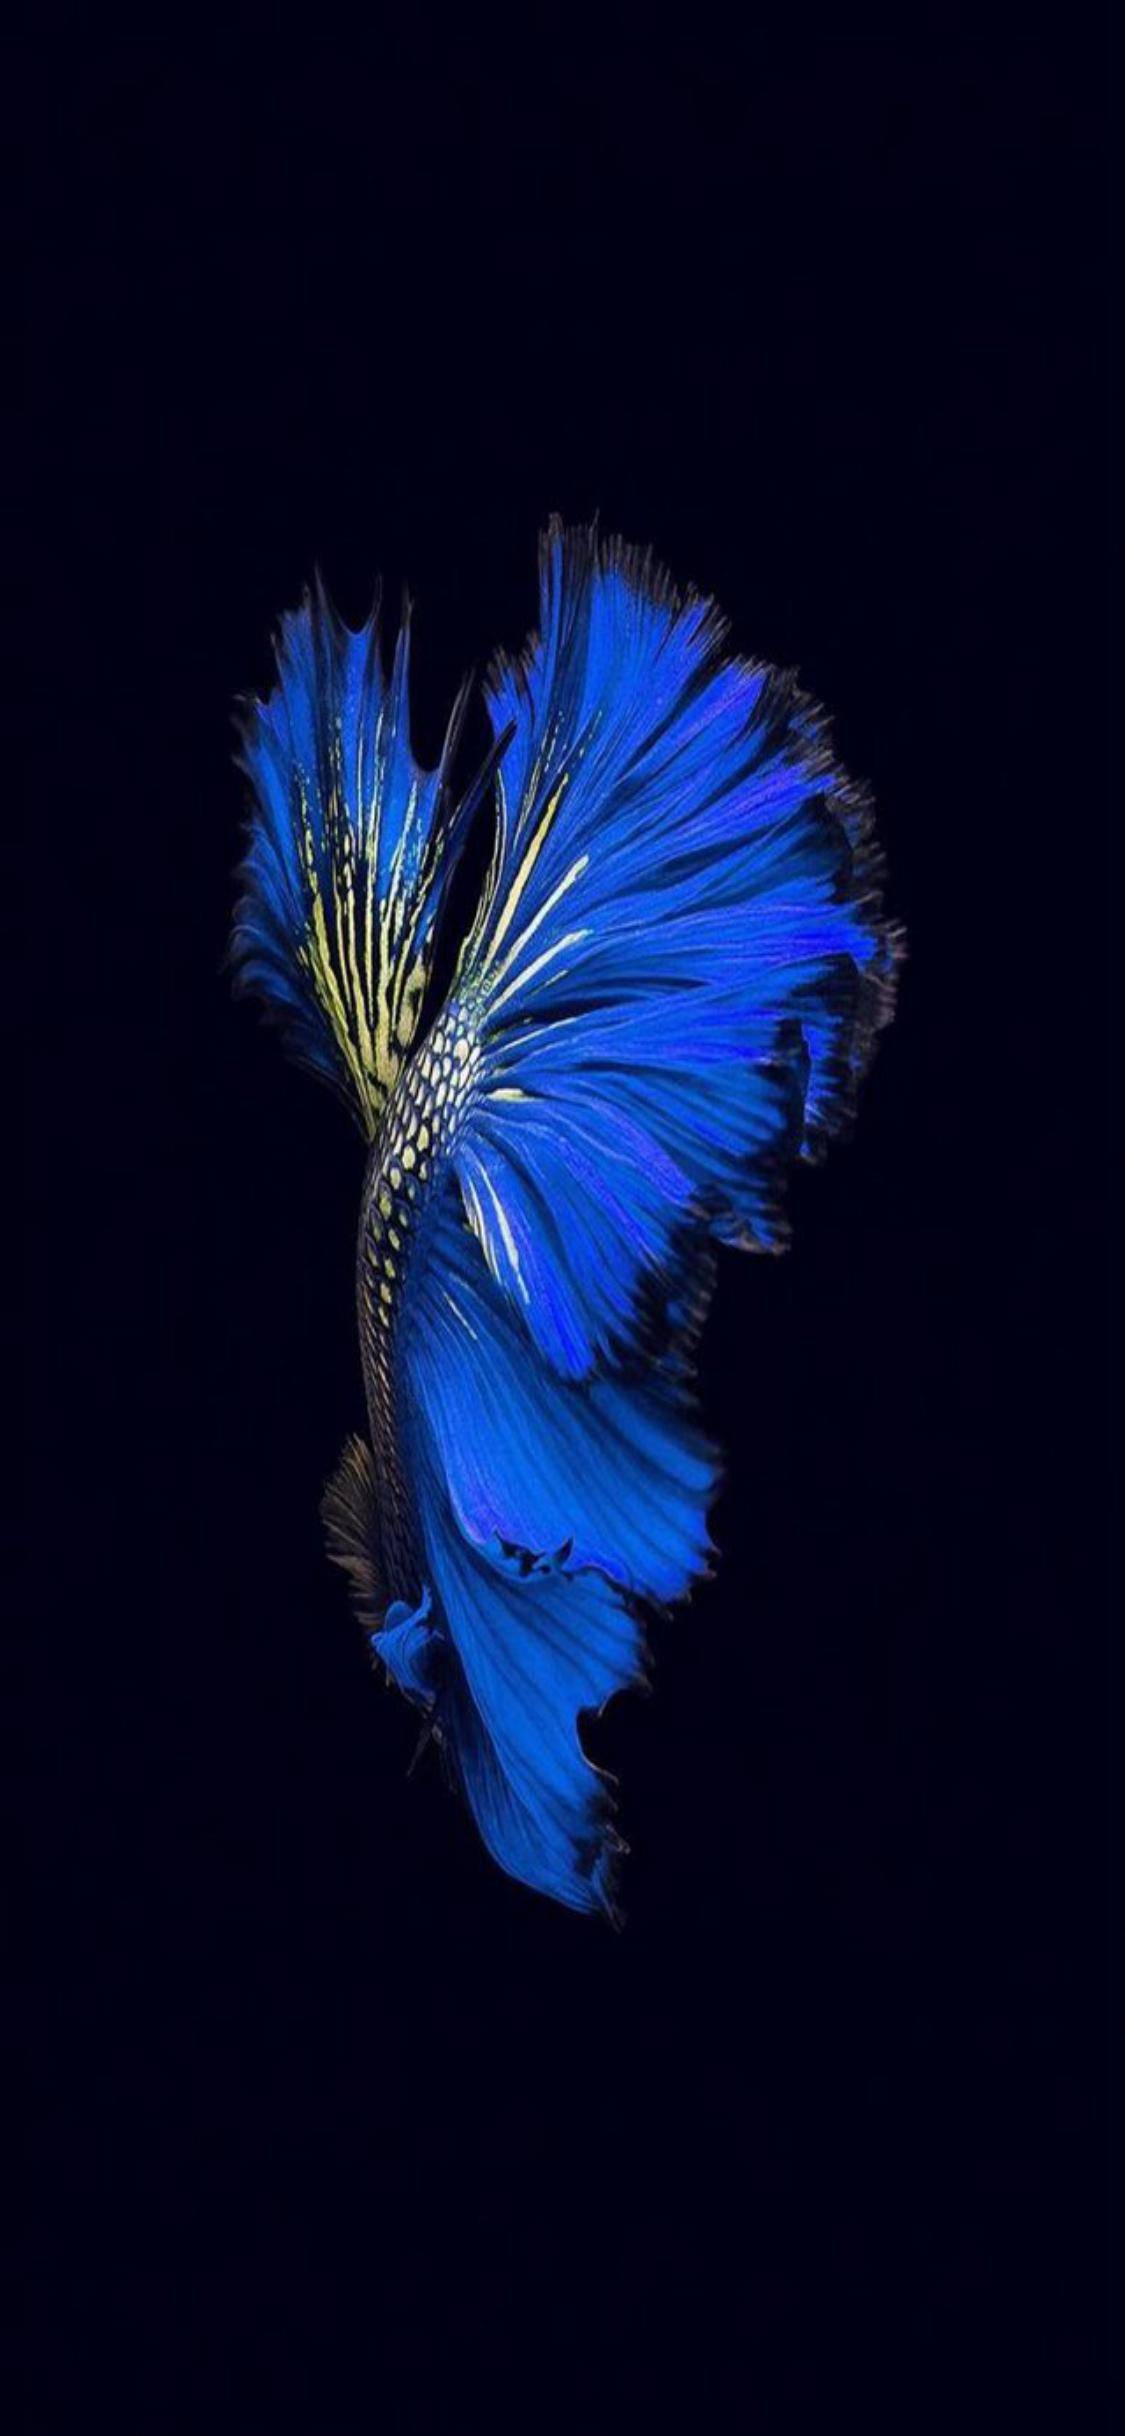 Beta Crowntail Fish Wallpaper AMOLED for iPhone X or 10